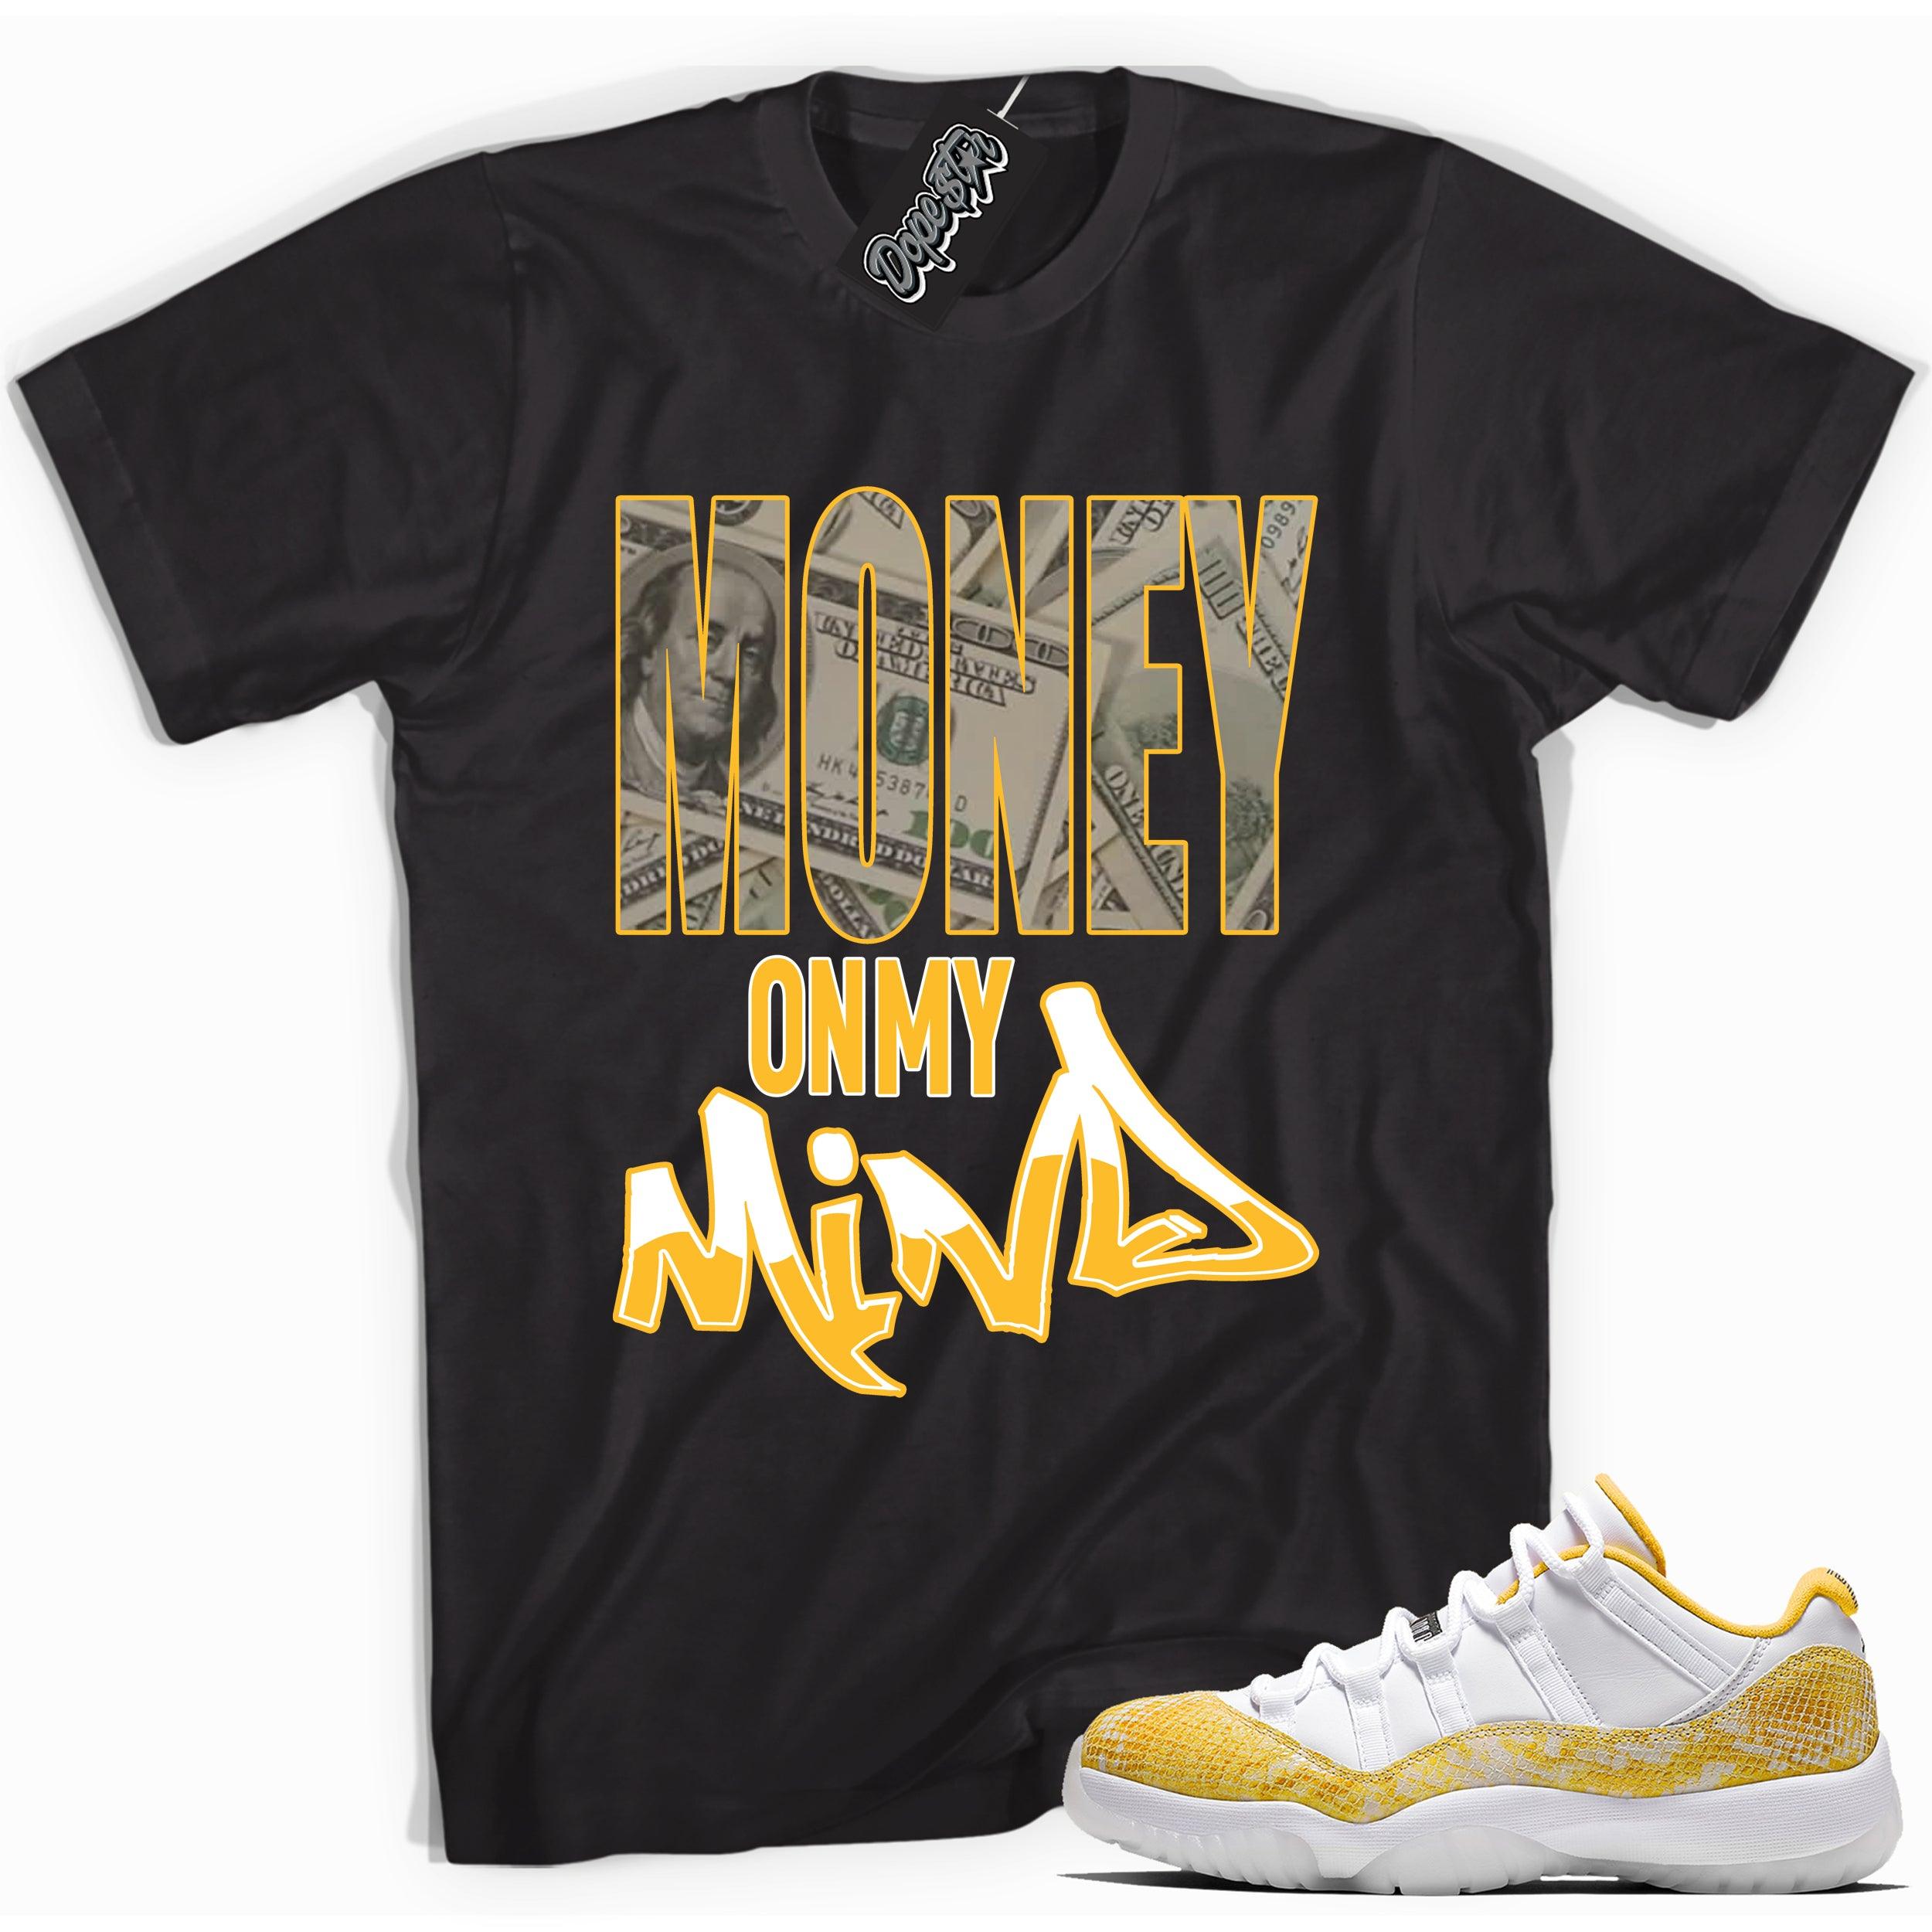 Cool black graphic tee with 'money on my mind' print, that perfectly matches  Air Jordan 11 Low Yellow Snakeskin sneakers